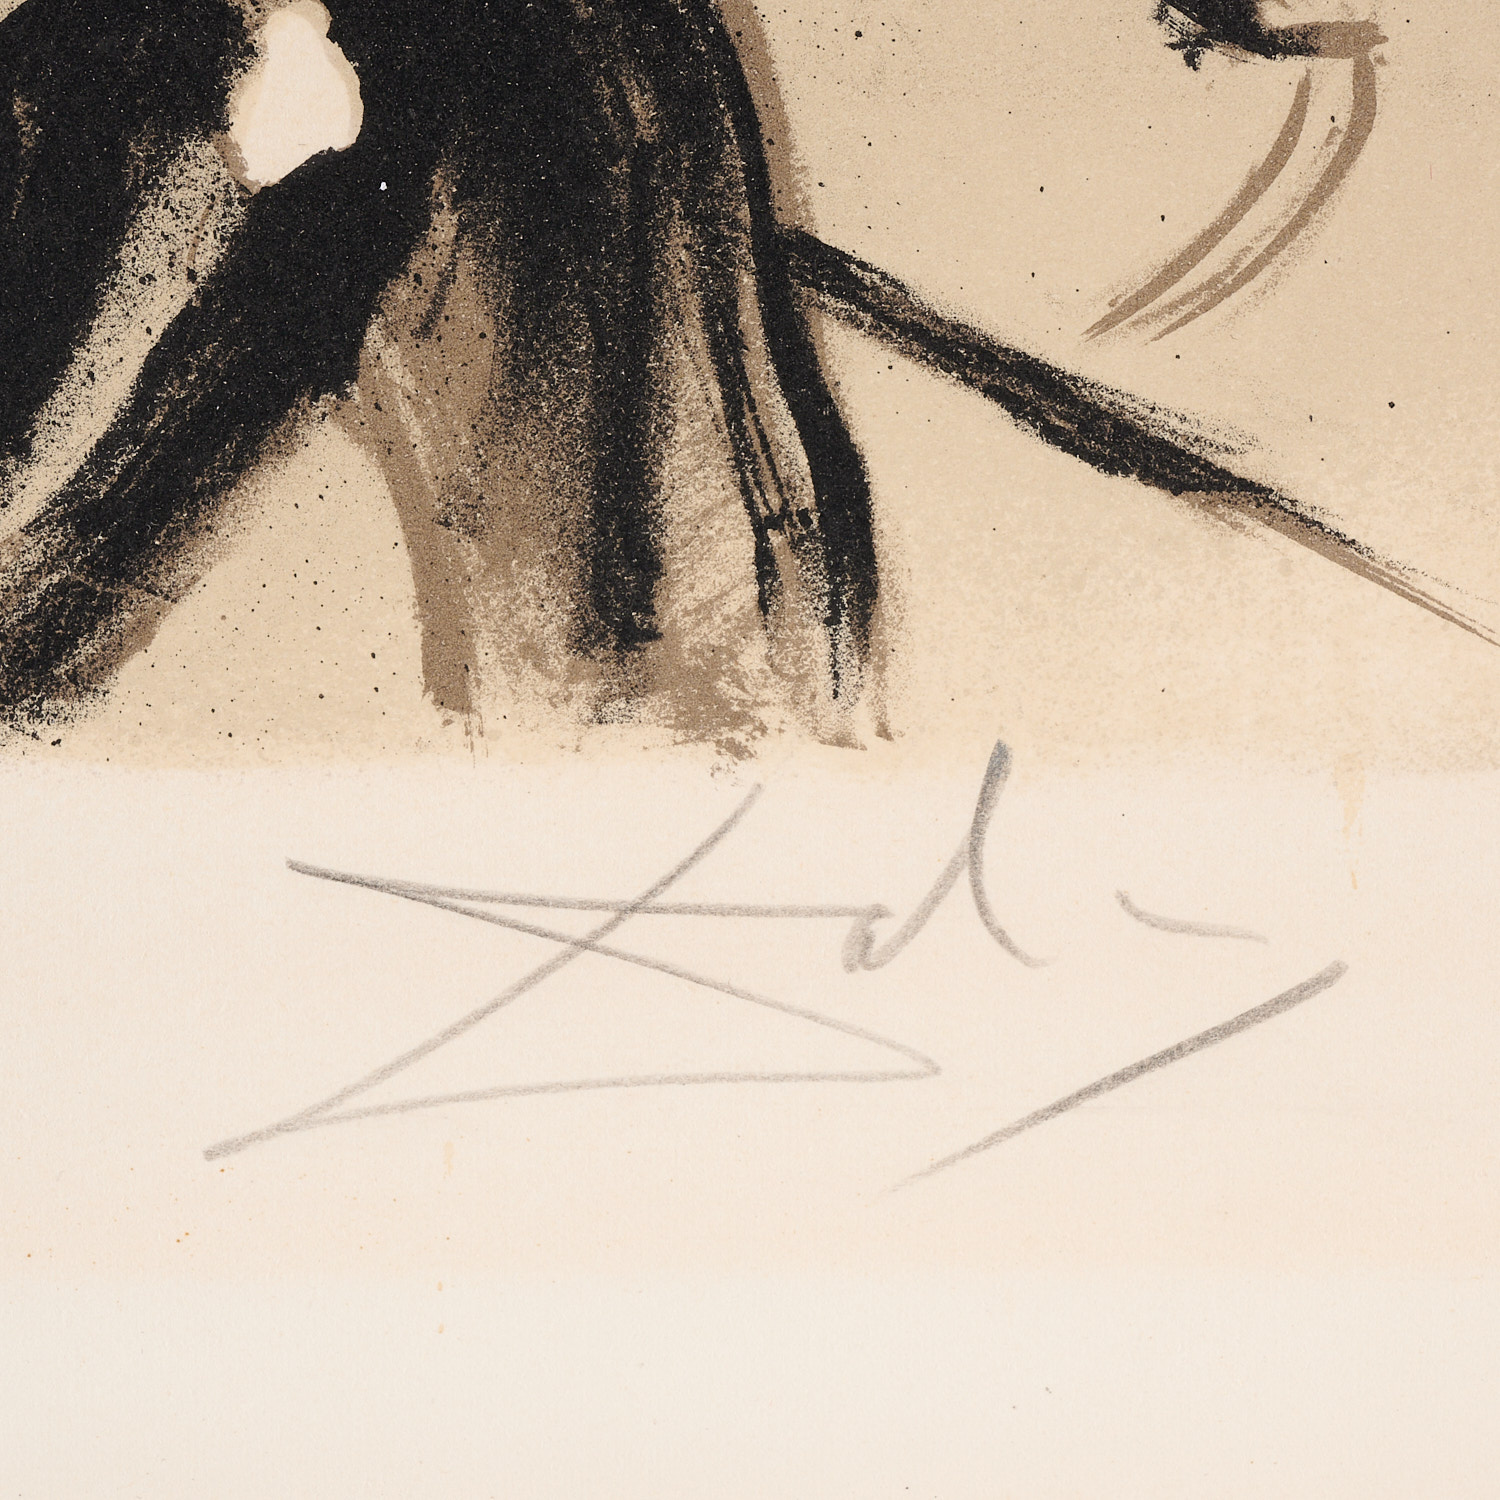 Salvador Dali, color lithograph on paper, 1970 - Image 5 of 6